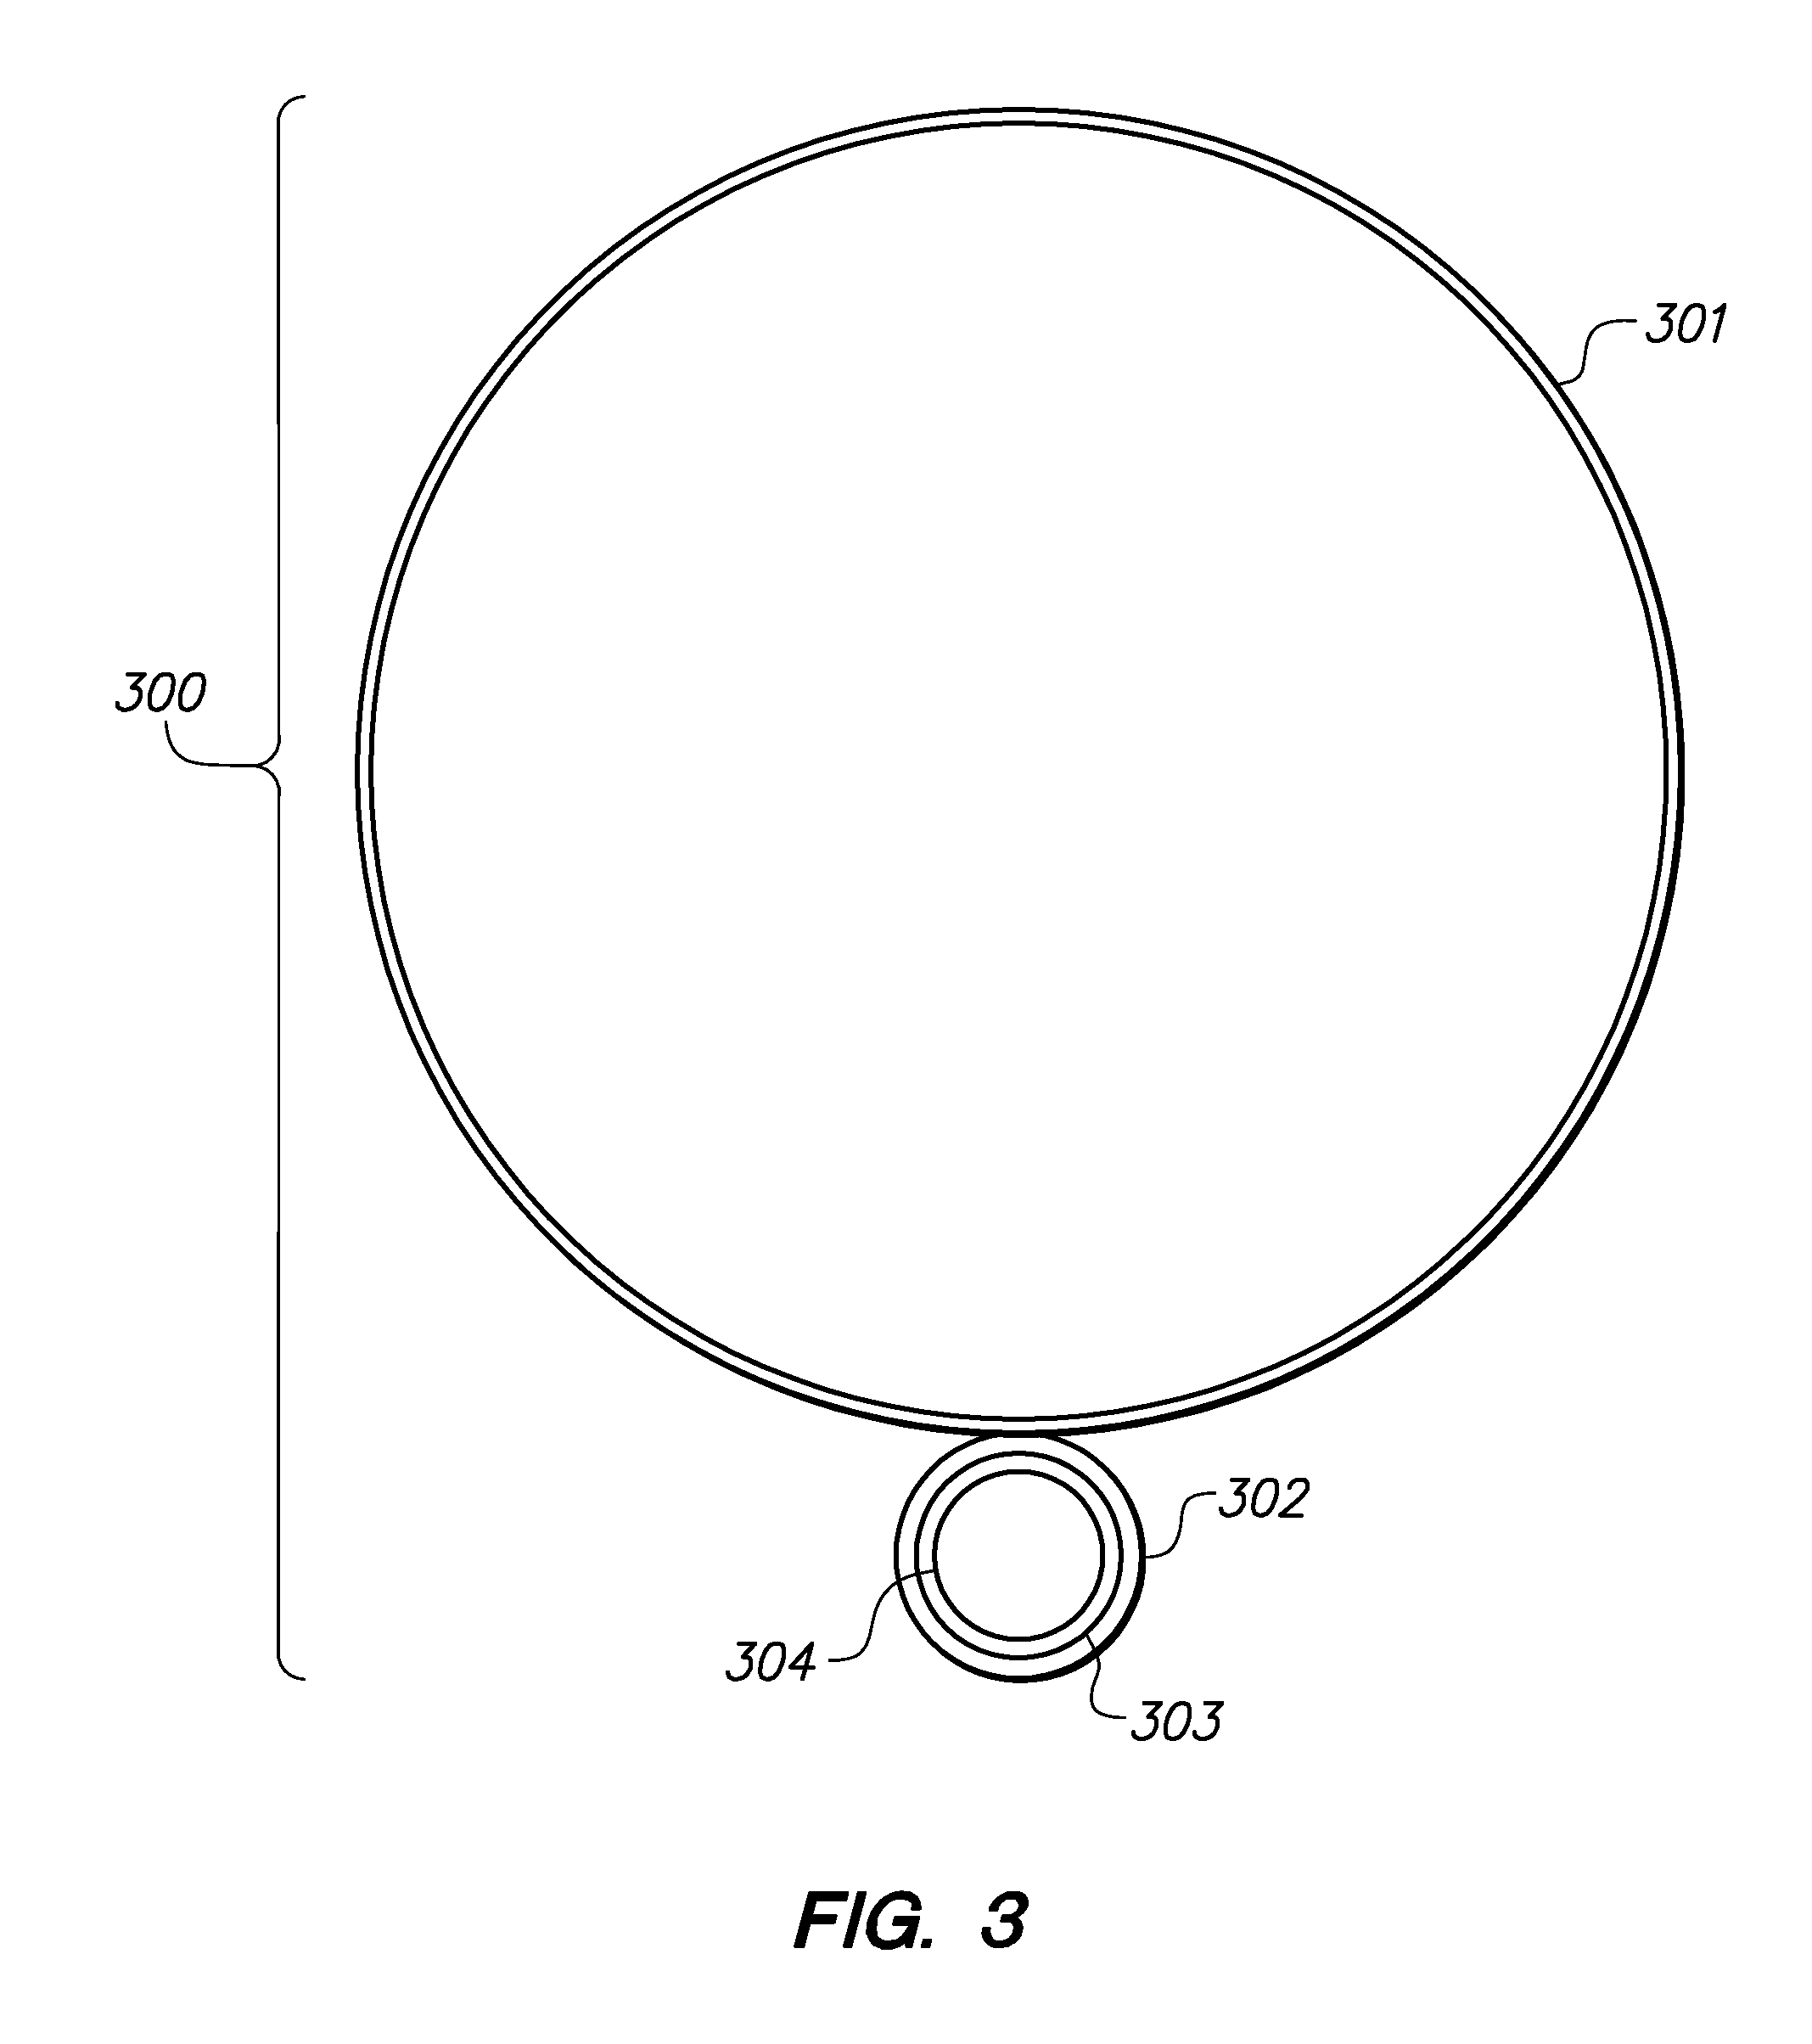 Apparatus comprising removable light source for decorative utility